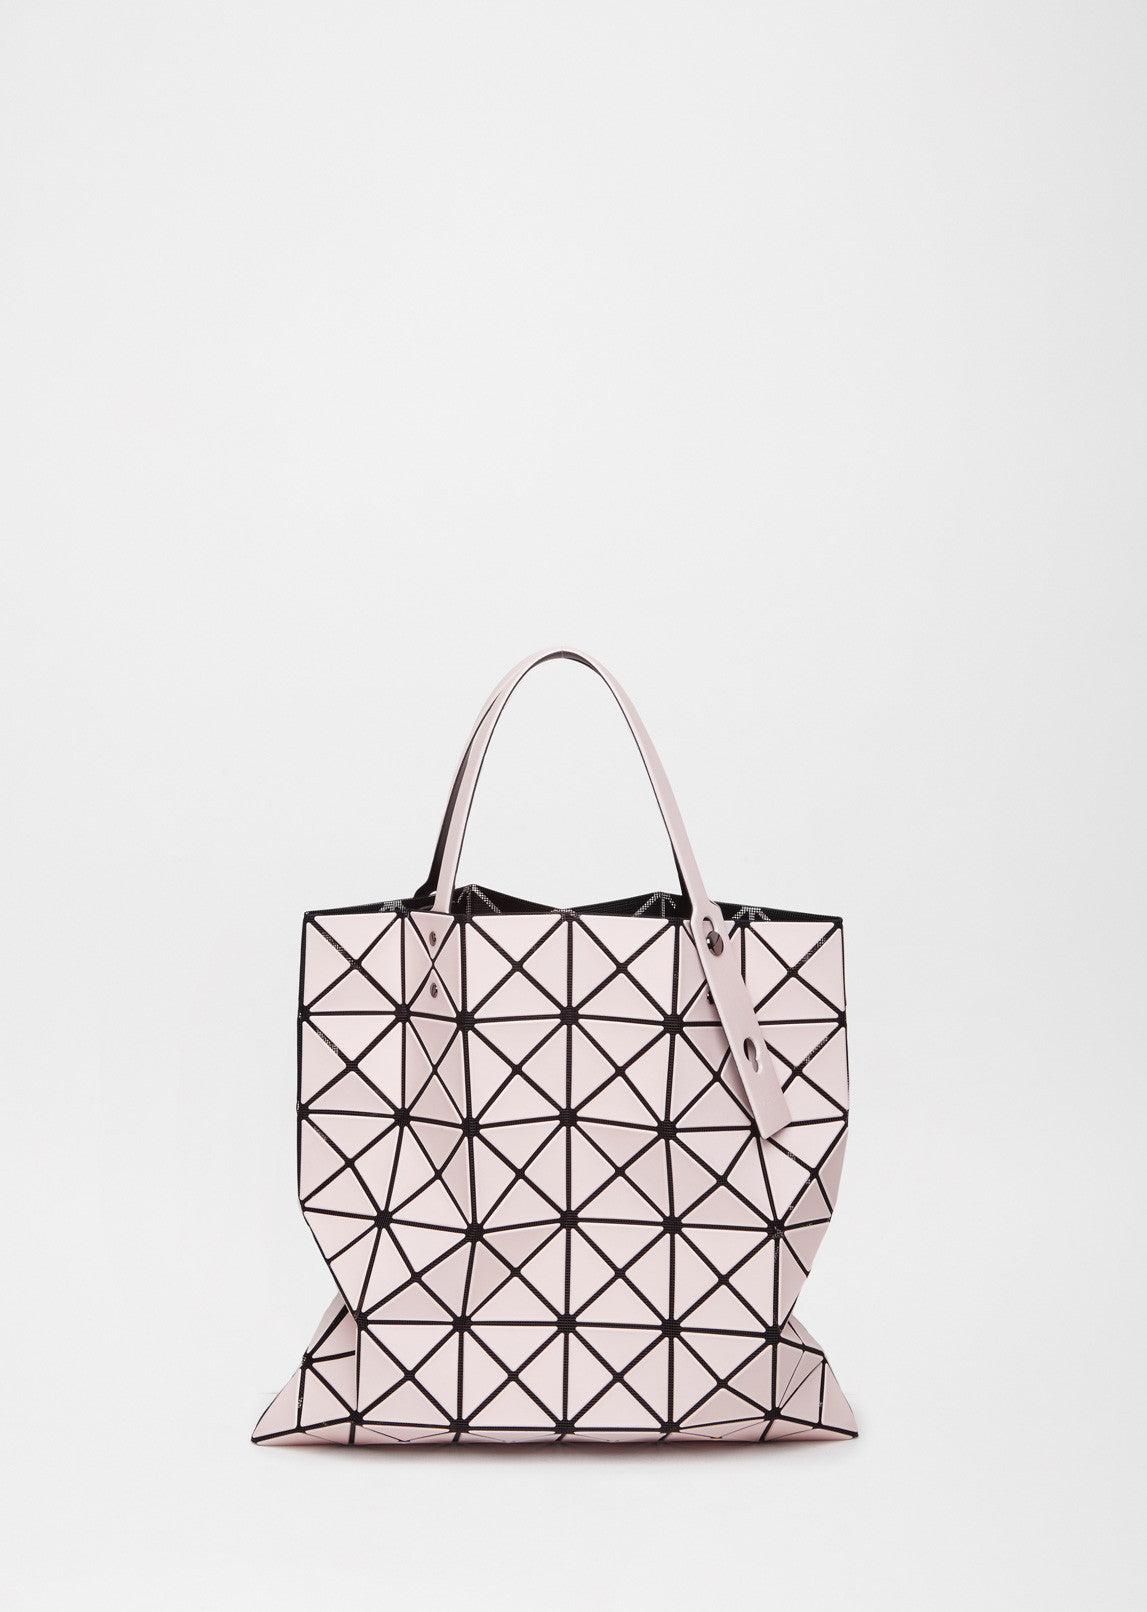 PLEATS PLEASE- ISSEY MIYAKE- TOTE BAG HOT PINK & WHITE